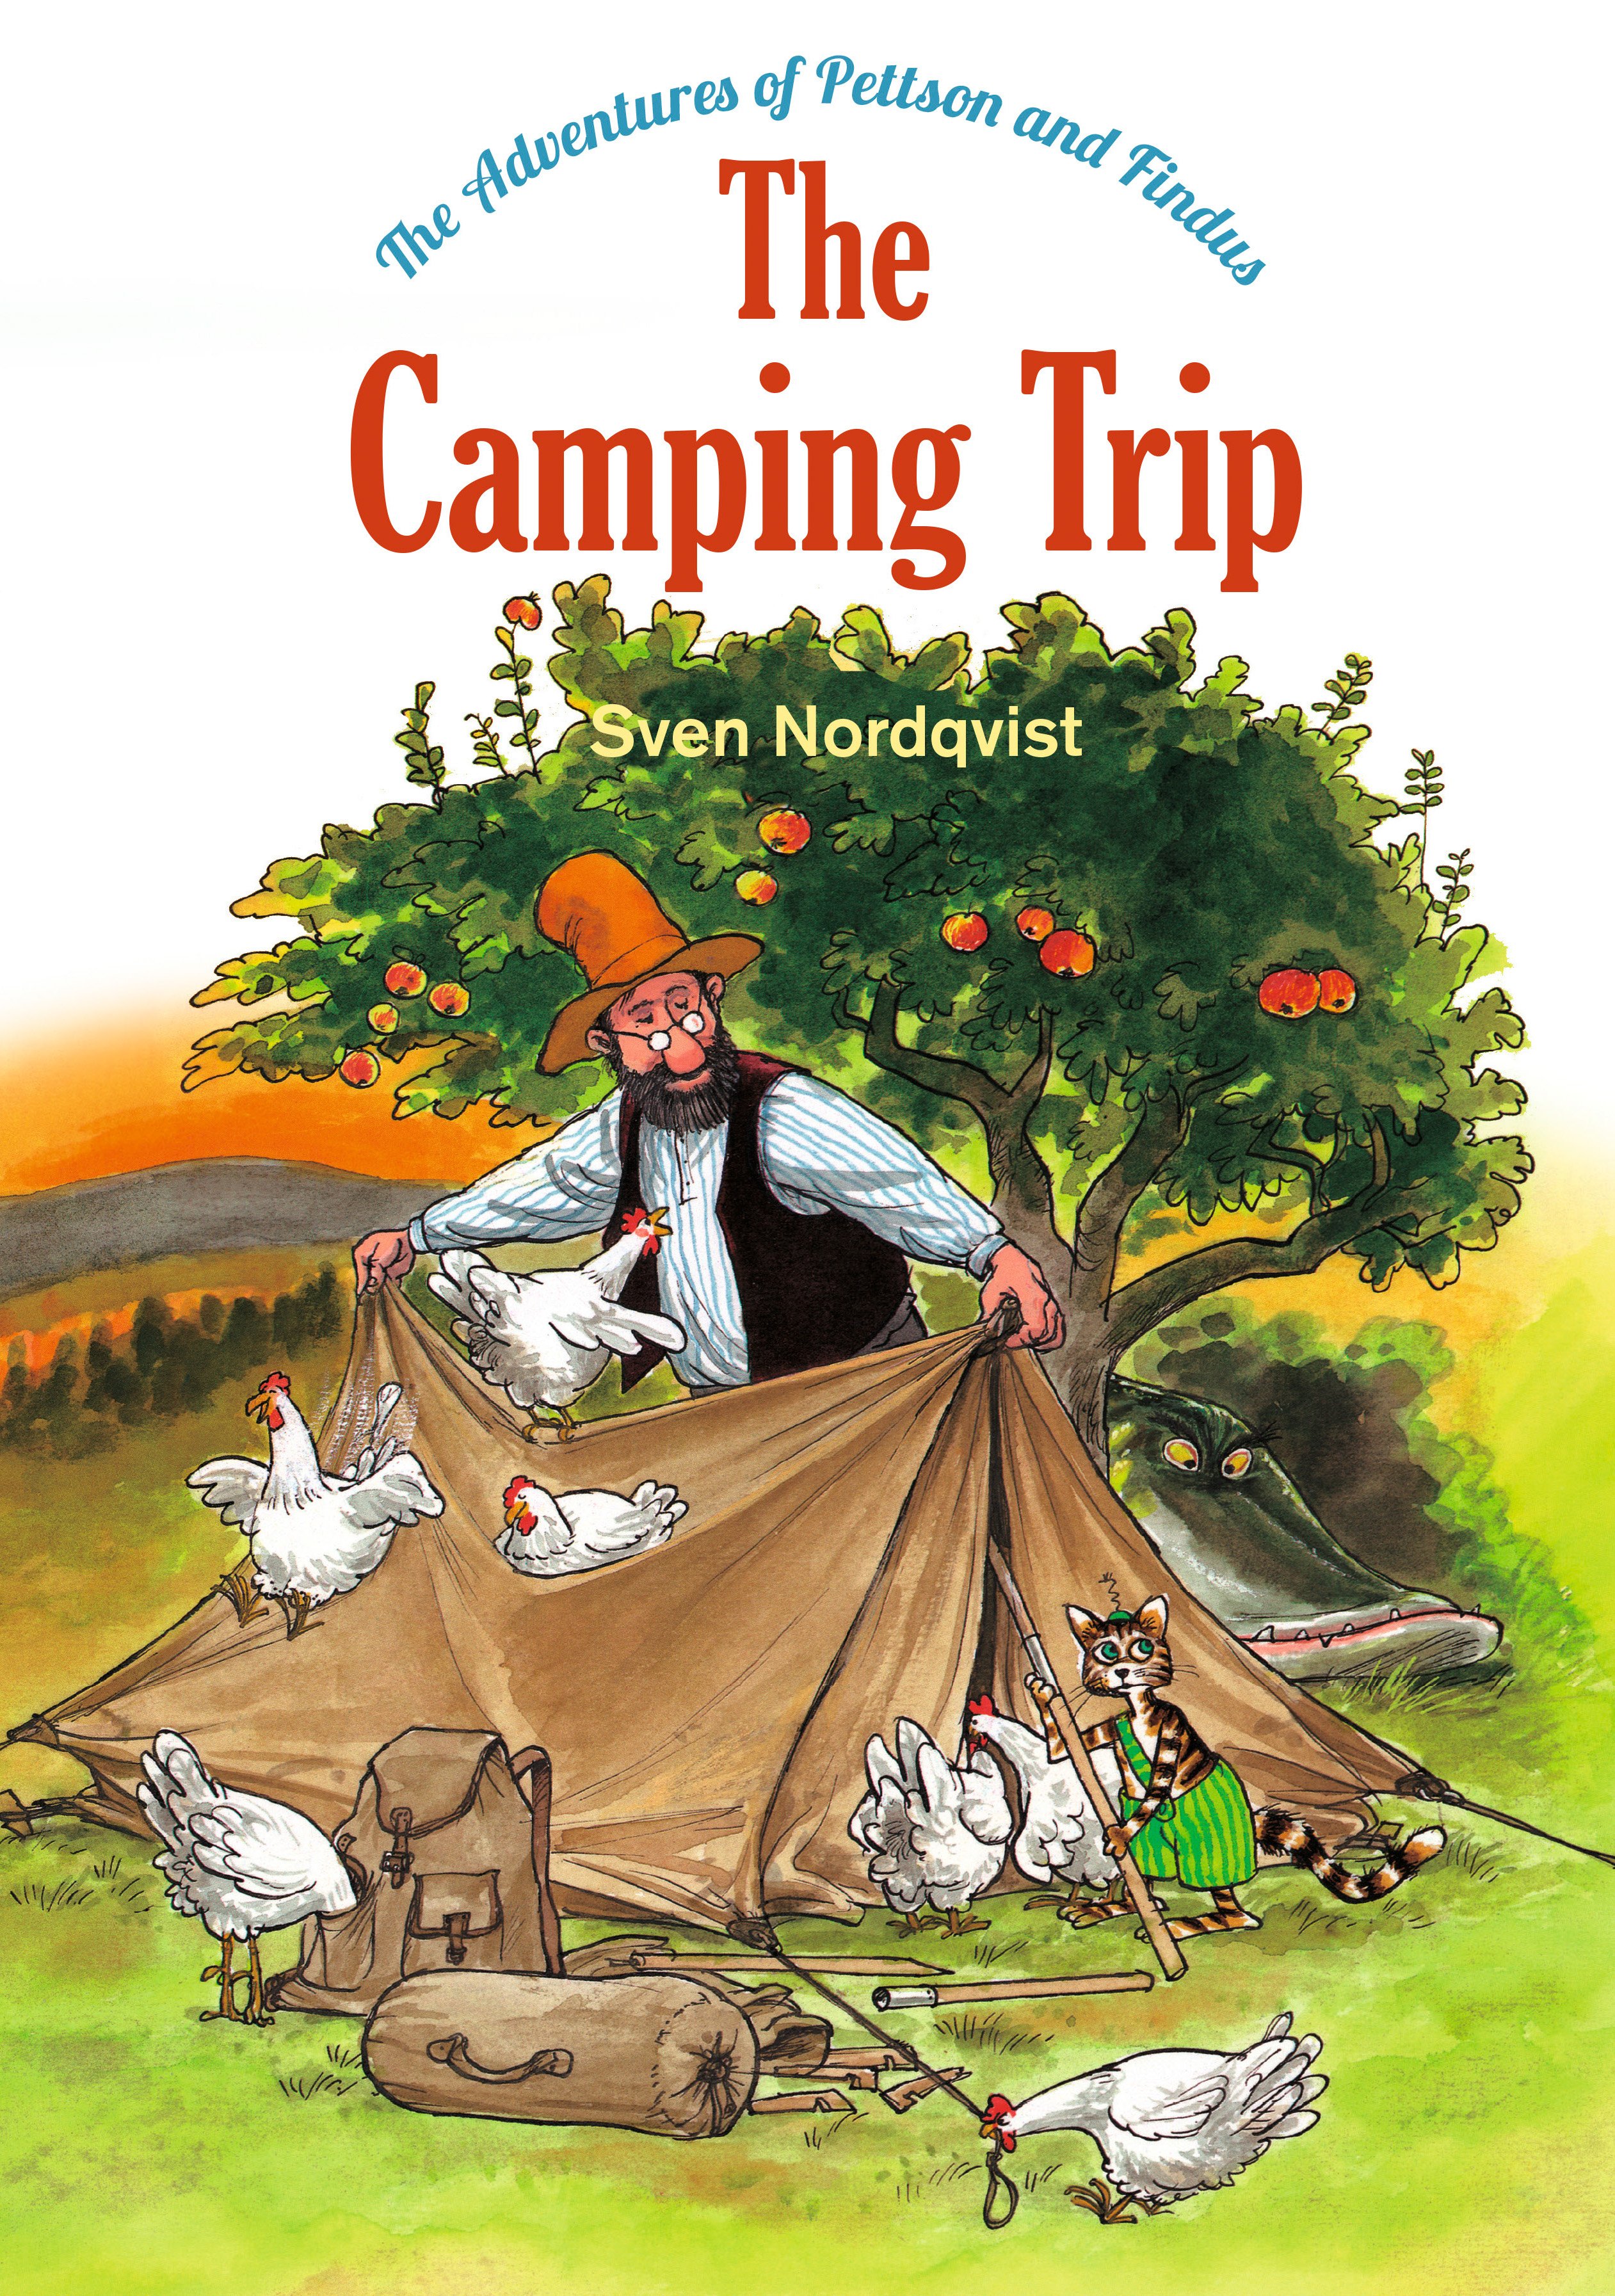 the camping trip by louis petrone